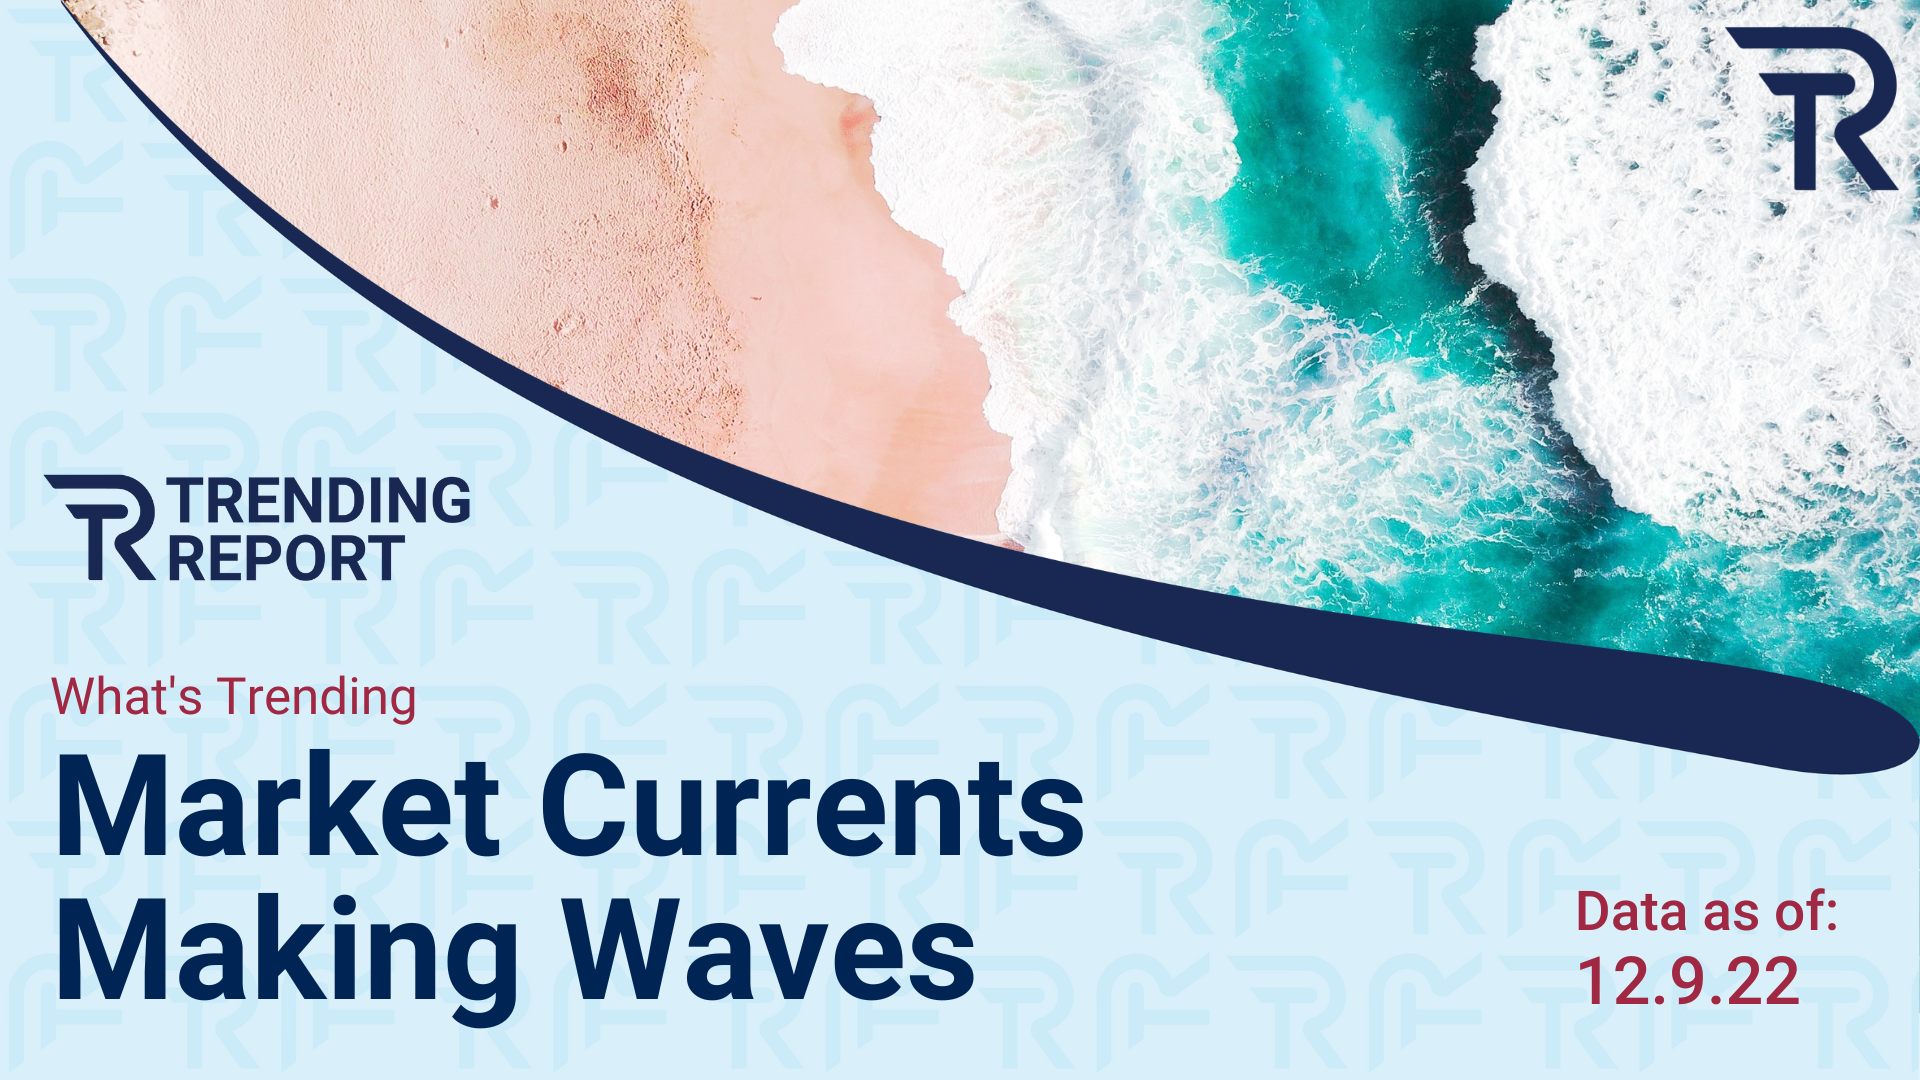 What's Trending: Market Currents Making Waves